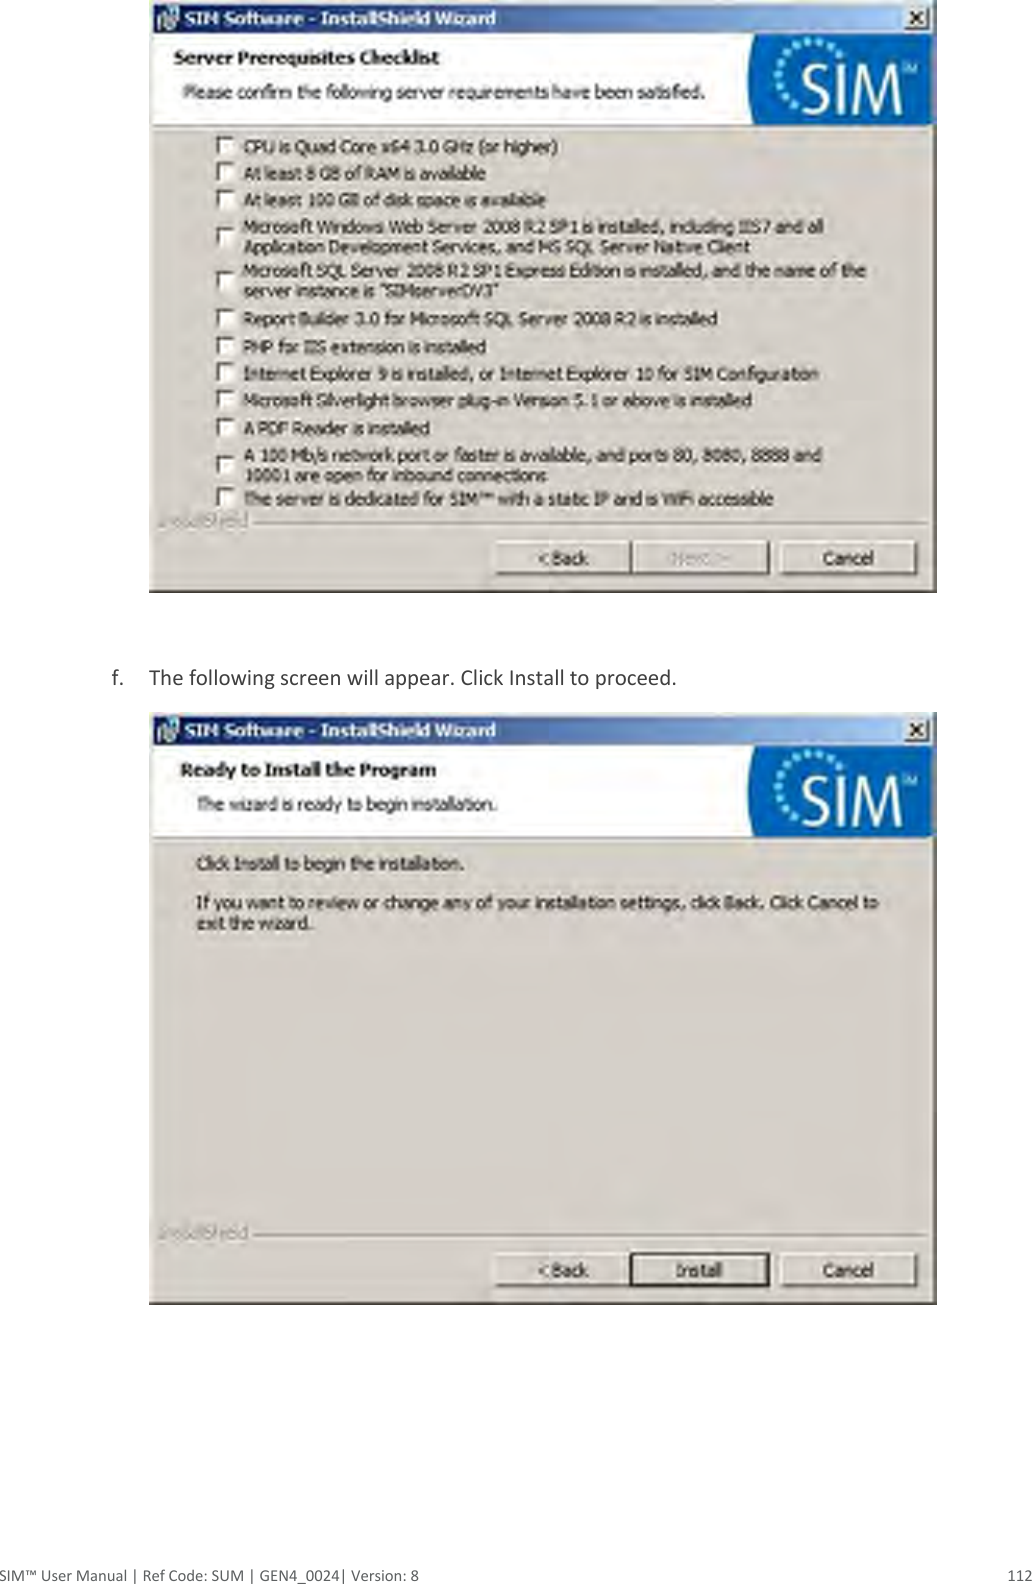  SIM™ User Manual | Ref Code: SUM | GEN4_0024| Version: 8  112   f. The following screen will appear. Click Install to proceed.      